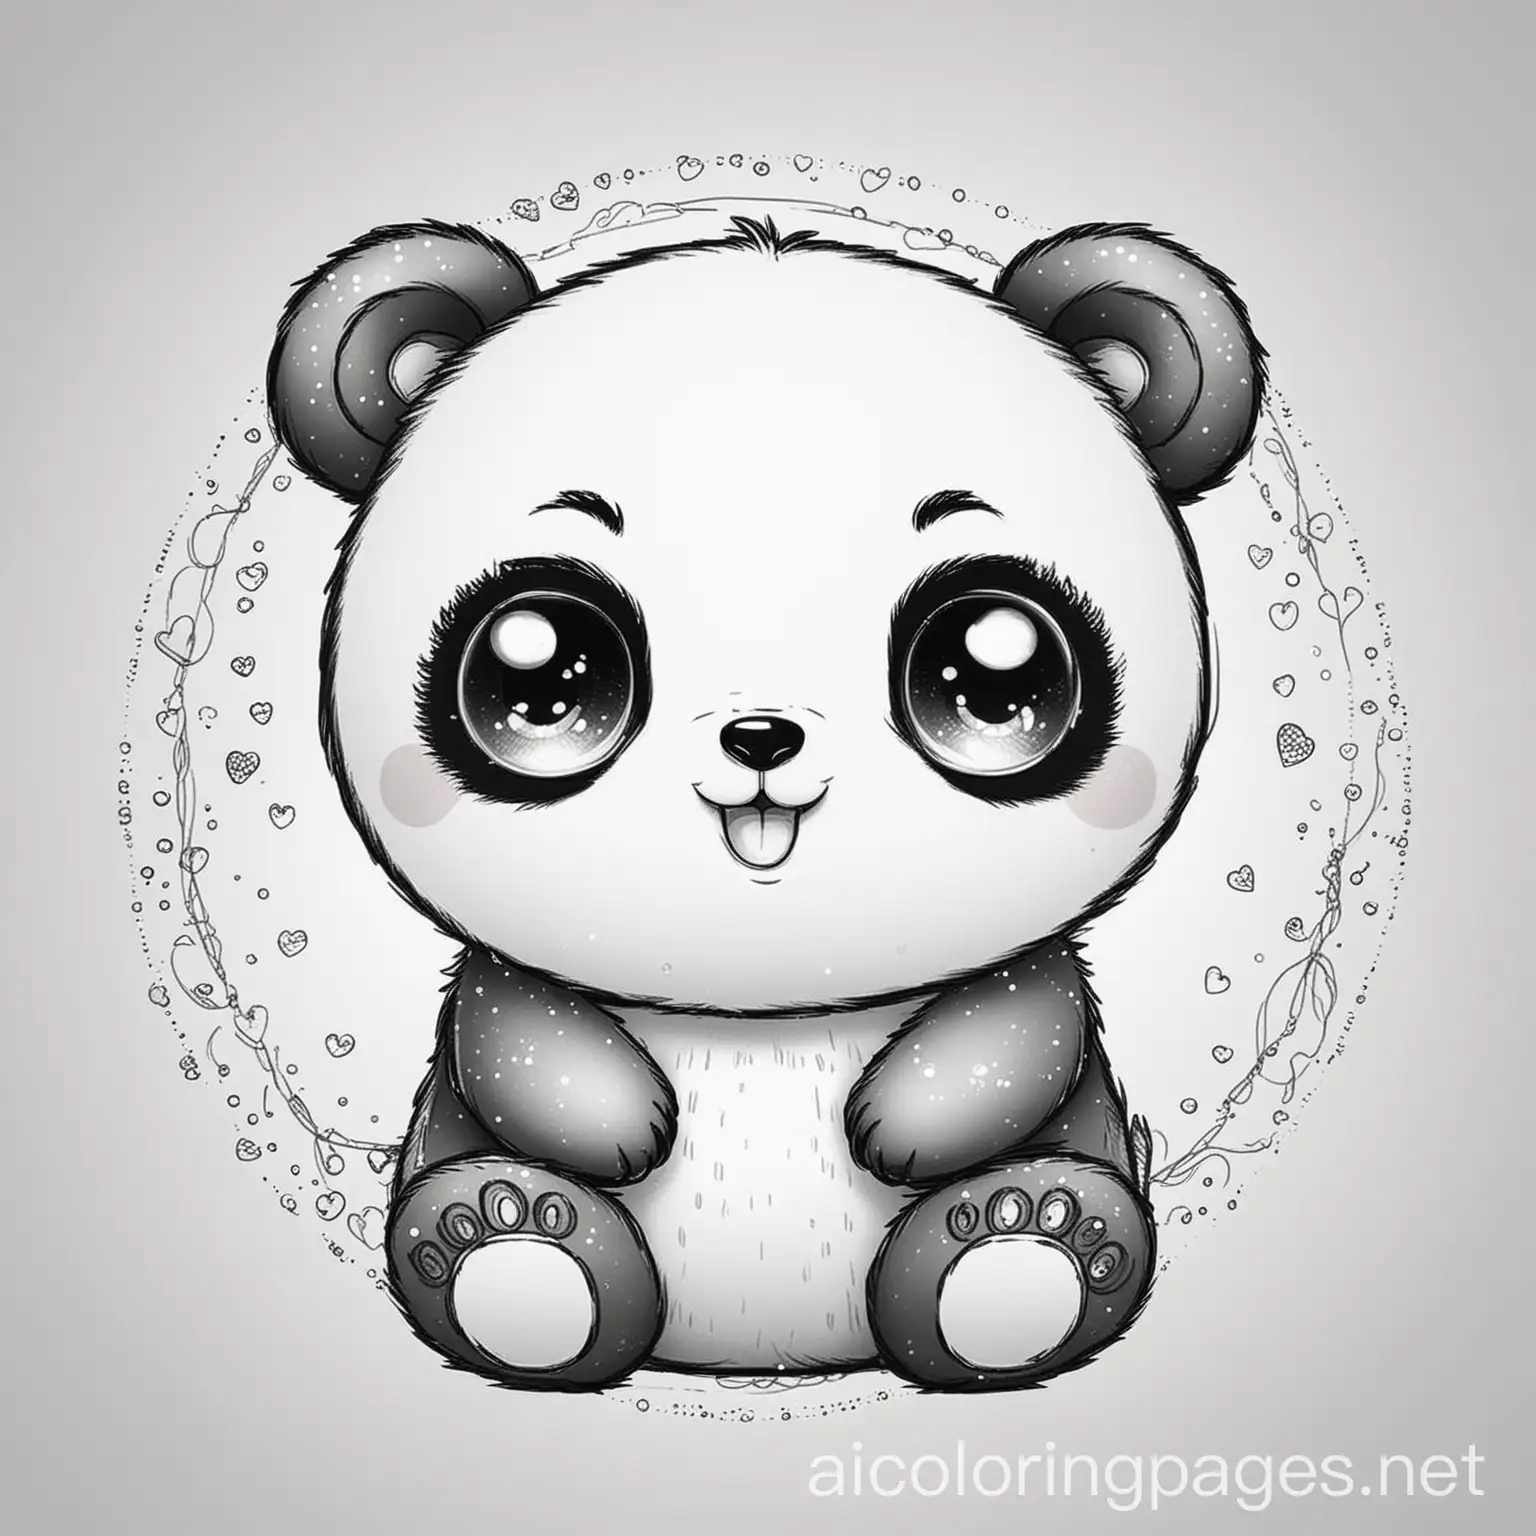 Kawaii Panda - Round body, big eyes with sparkles, and a little heart on the tummy., Coloring Page, black and white, line art, white background, Simplicity, Ample White Space. The background of the coloring page is plain white to make it easy for young children to color within the lines. The outlines of all the subjects are easy to distinguish, making it simple for kids to color without too much difficulty